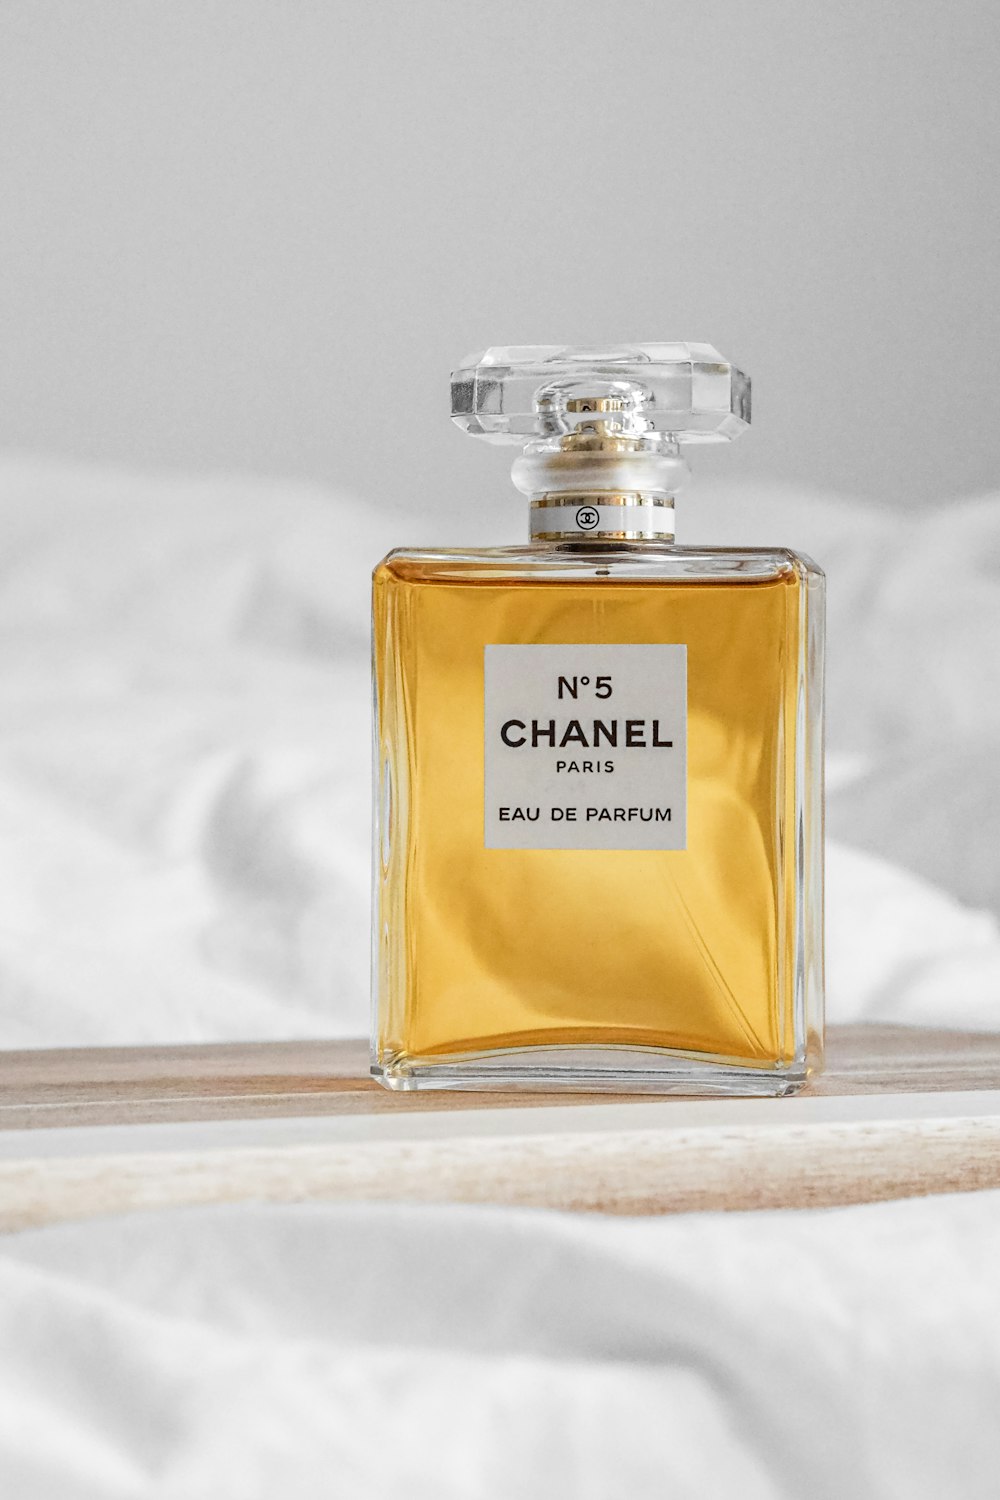 From Nazis to Churchill: The Stink Behind Chanel No. 5 - Life & Culture 